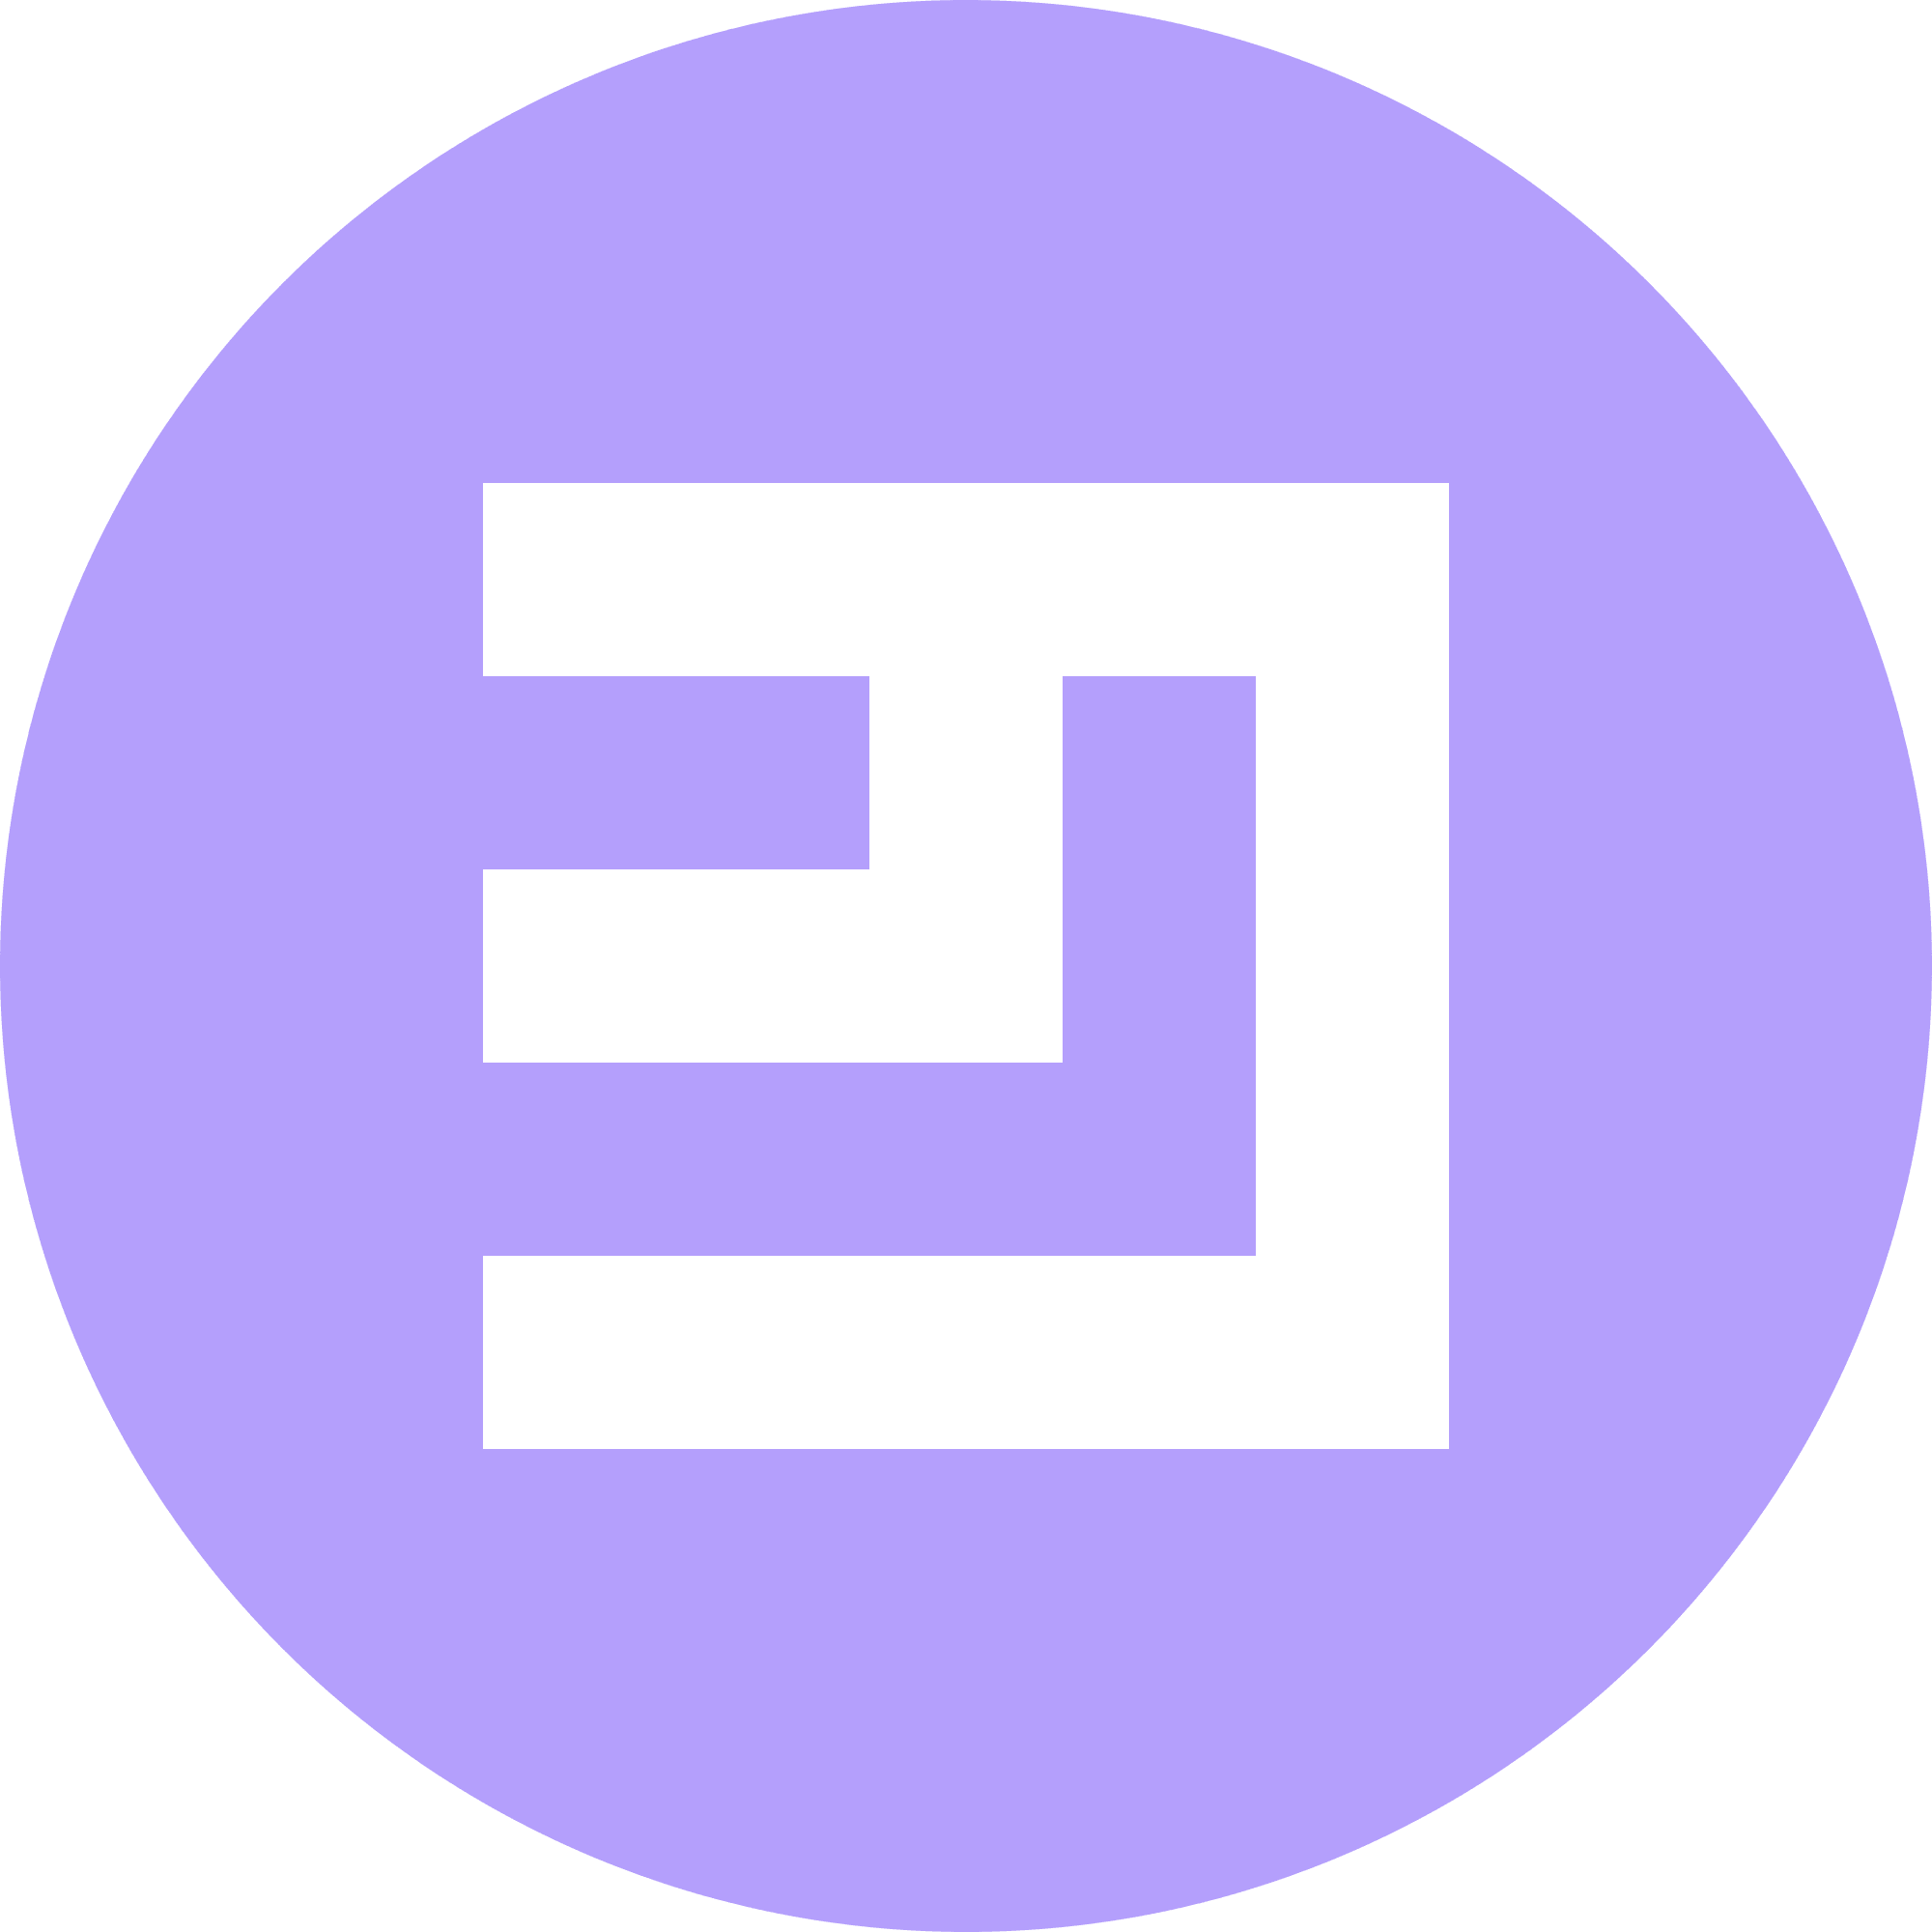 Emercoin logo in png format